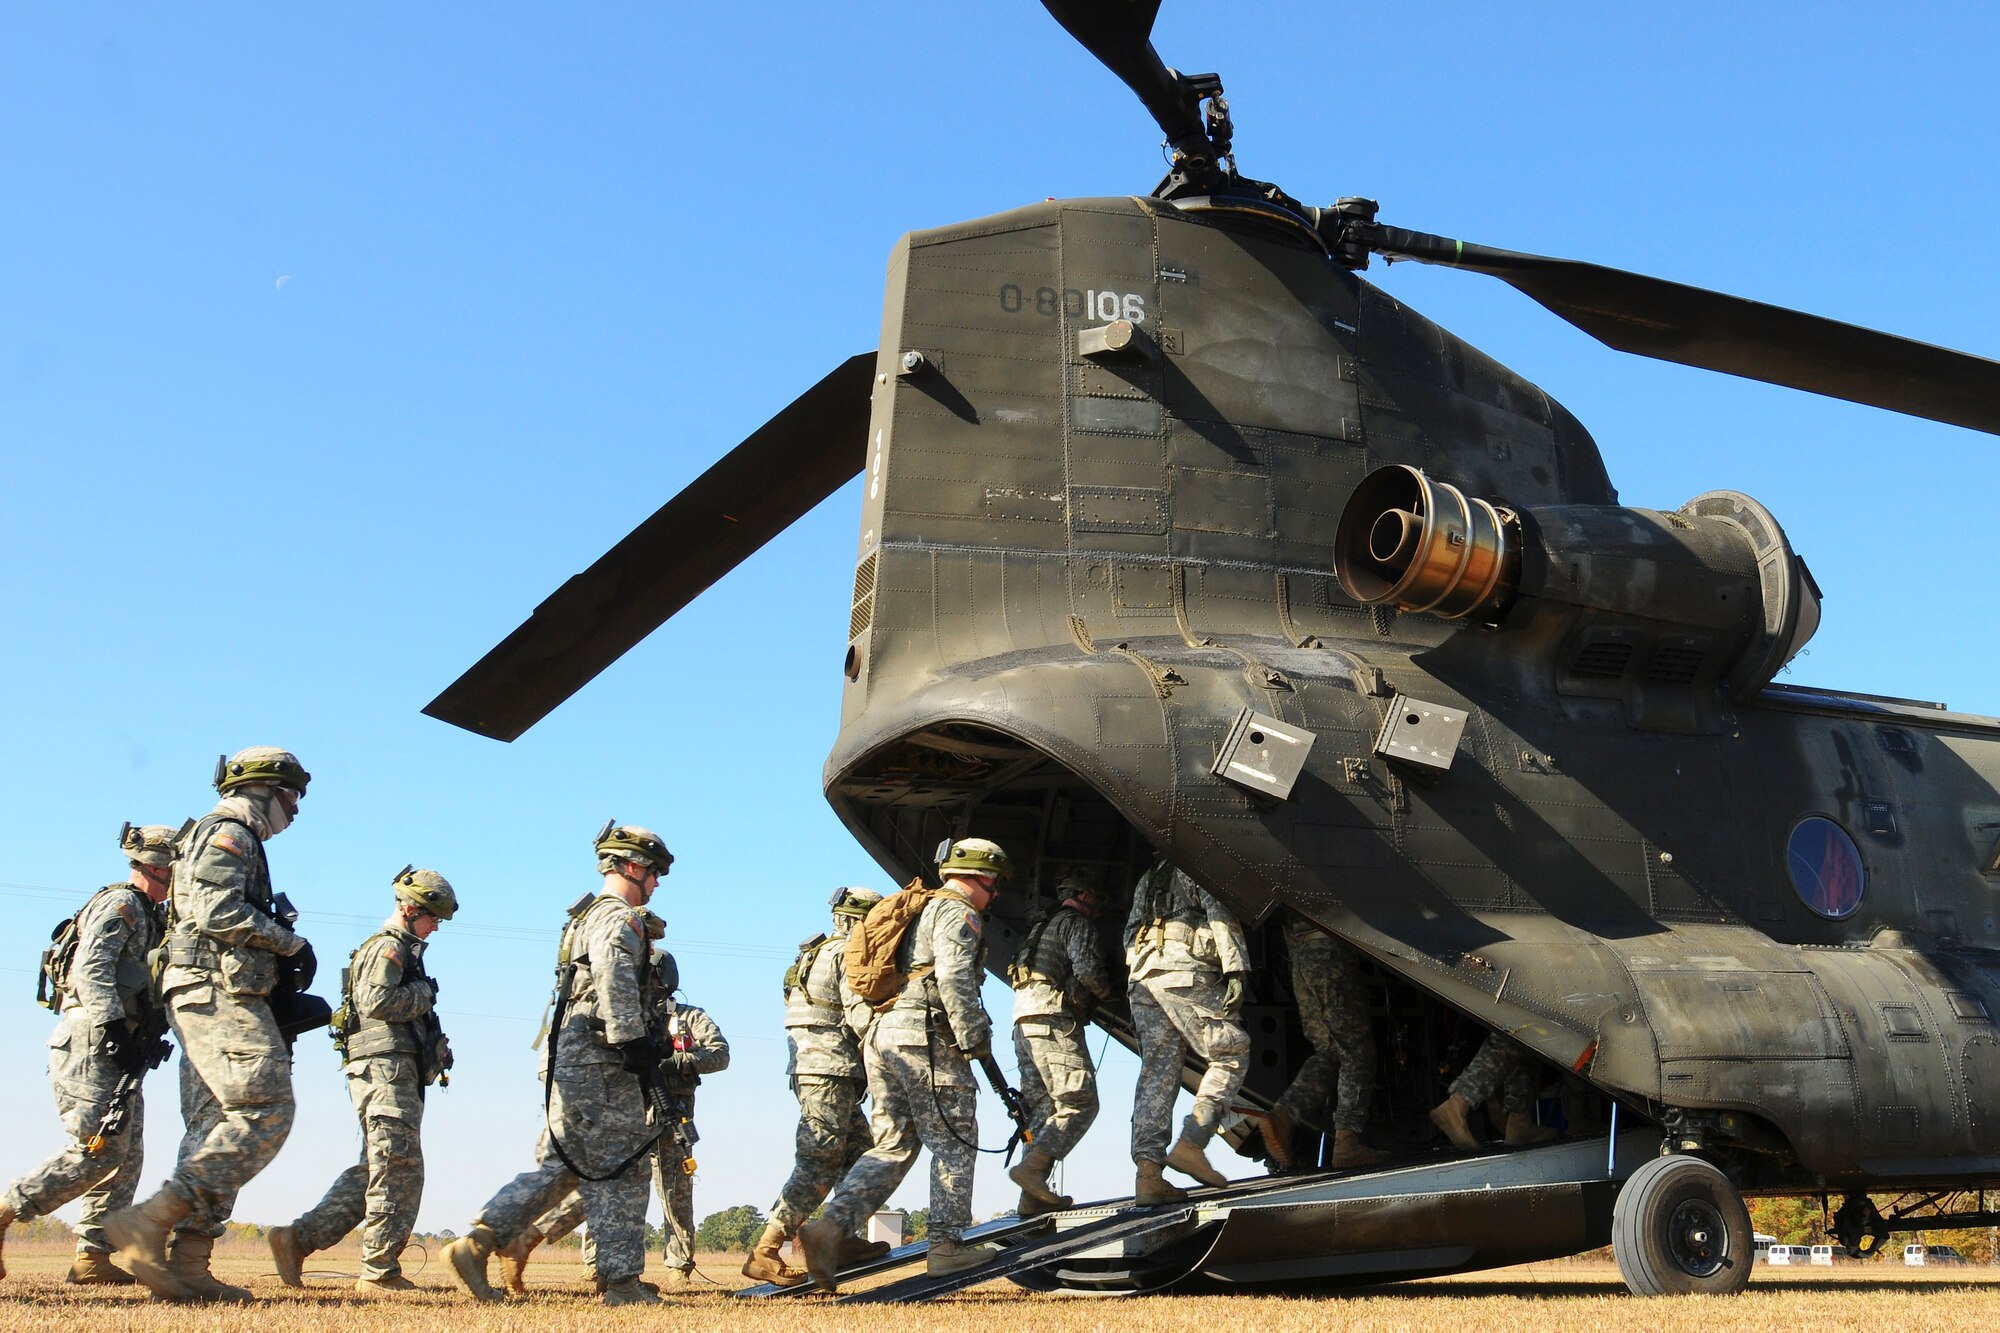 South Carolina National Guard, along with North Carolina and Georgia National Guard units conducted “Carolina Thunder 14”,  a drill weekend, joint training exercise Nov. 15, 2014. More than 30 aircraft participated in the mass take-off from McEntire Joint National Guard Base, Eastover, S.C. Units conducted air and ground operations at the Savannah River Site in Allendale, S.C. The S.C. Air National Guard 169th Fighter Wing’s F-16 Fighting Falcons joined AH-64D Apaches, CH-47 Chinooks, UH-60 Black Hawks and more than 100 Infantry Soldiers from the S.C. Army National Guard to train with Apaches from the N.C. Army National Guard and the Joint Surveillance Target Attack Radar System (JSATRS) and Joint Terminal Training Center (JTAC) from the Georgia Air National Guard in a collective force-on-force, enemy suppression and assault mission. (U.S. Army National Guard photo by Sgt. Brian Calhoun/Released)